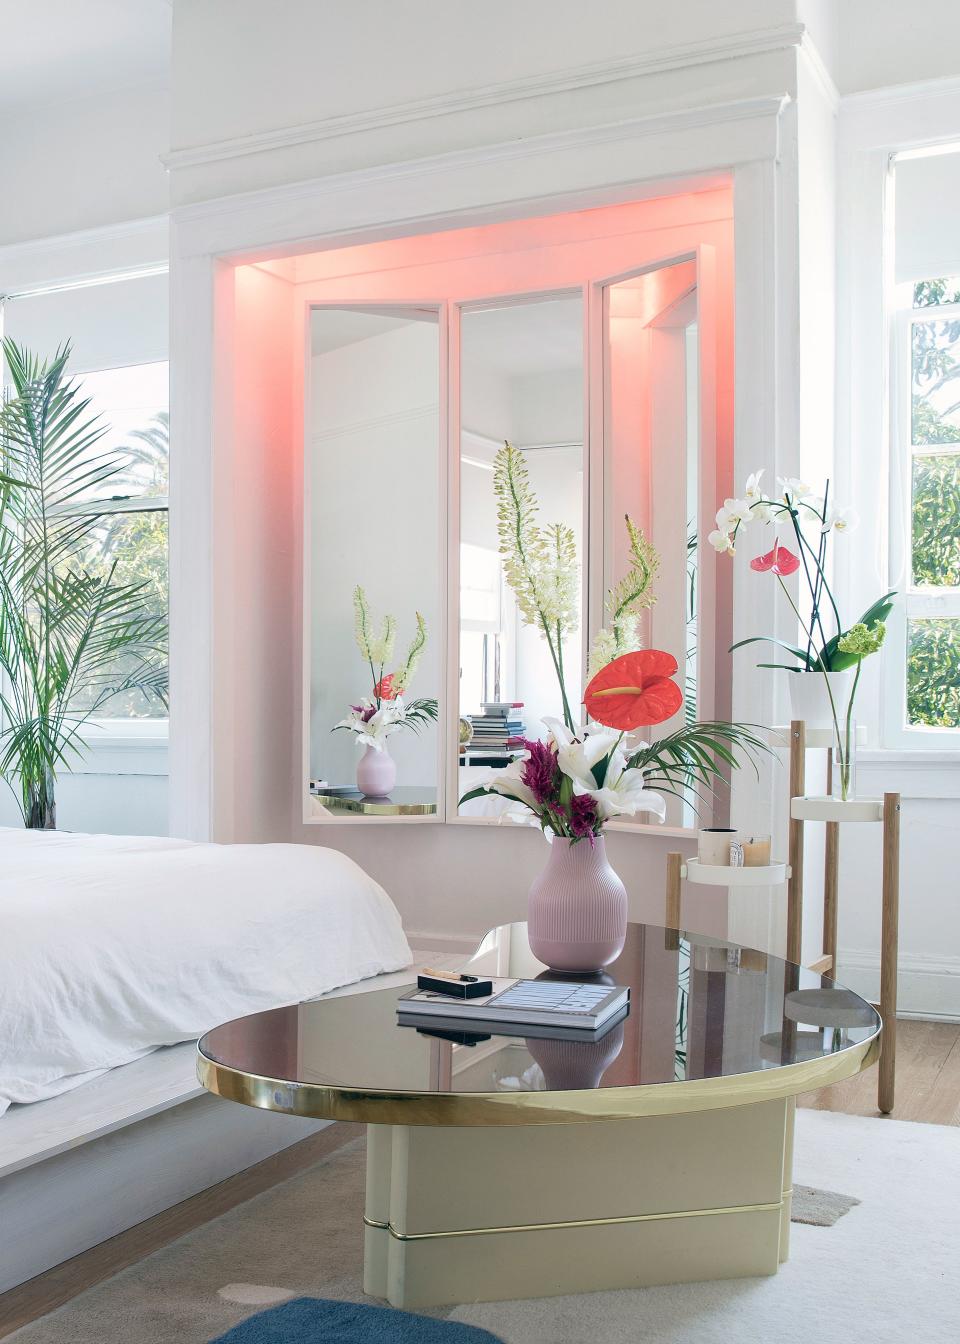 Colored light bulbs cast a bright pink glow on an awkwardly sized nook, once used for a Murphy bed. “The triptych mirror fit perfectly," Hannah says.